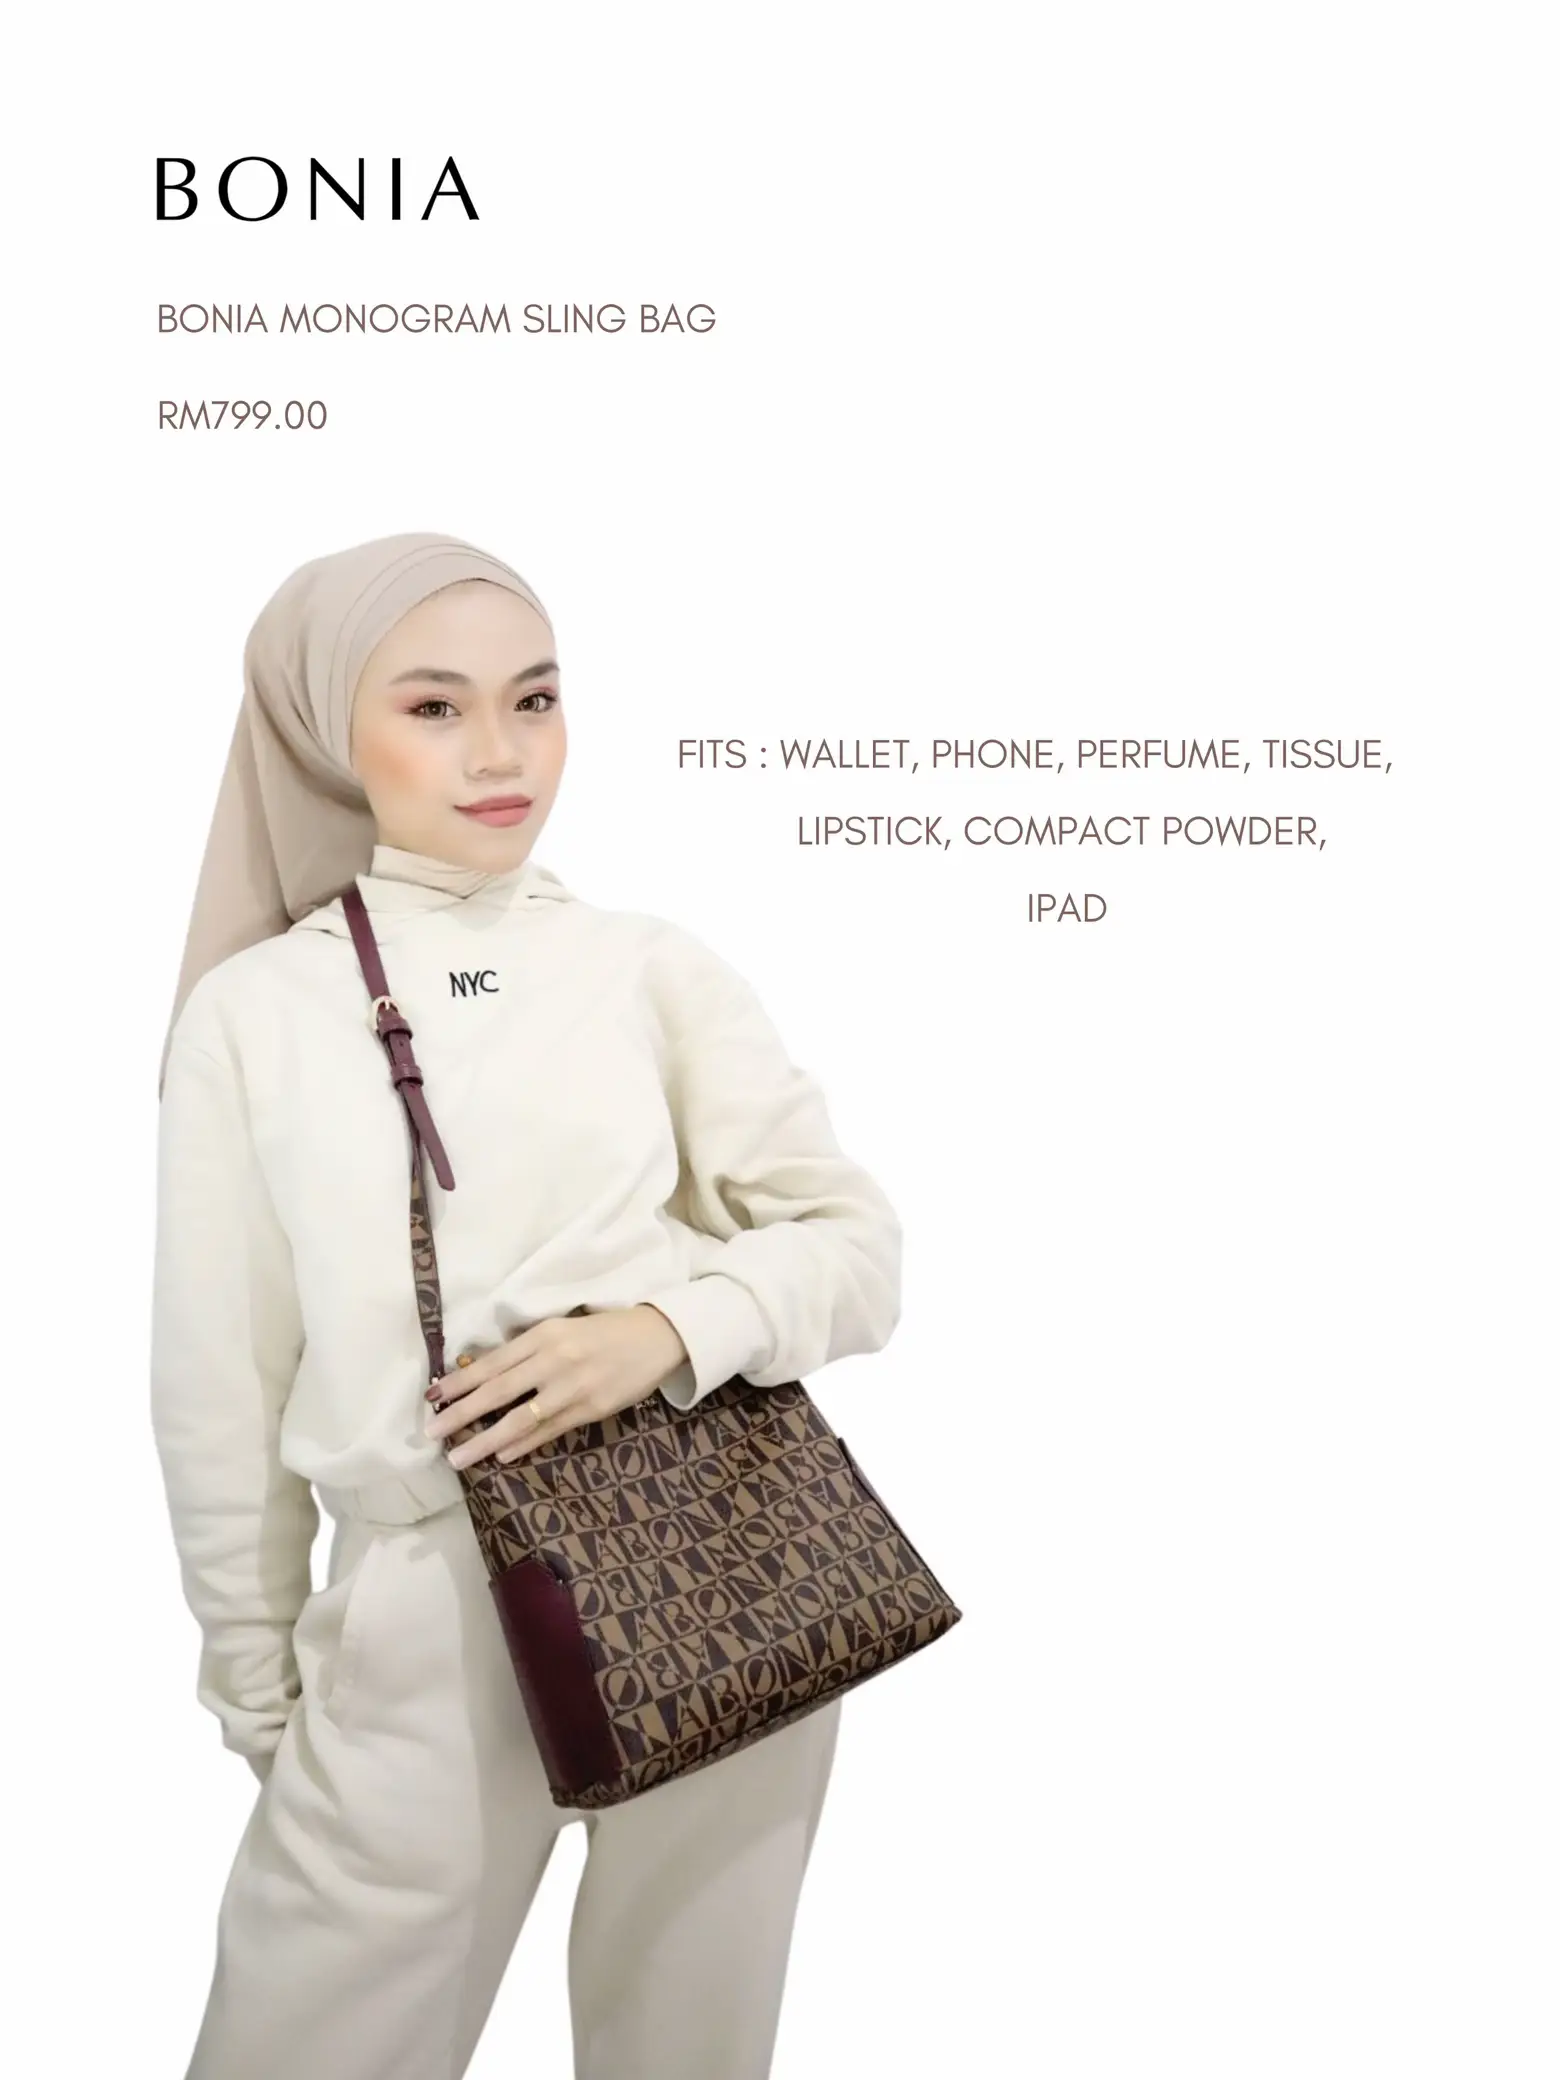 BONIA? IS IT WORTH THE HYPE?, Gallery posted by Misza Syahzani